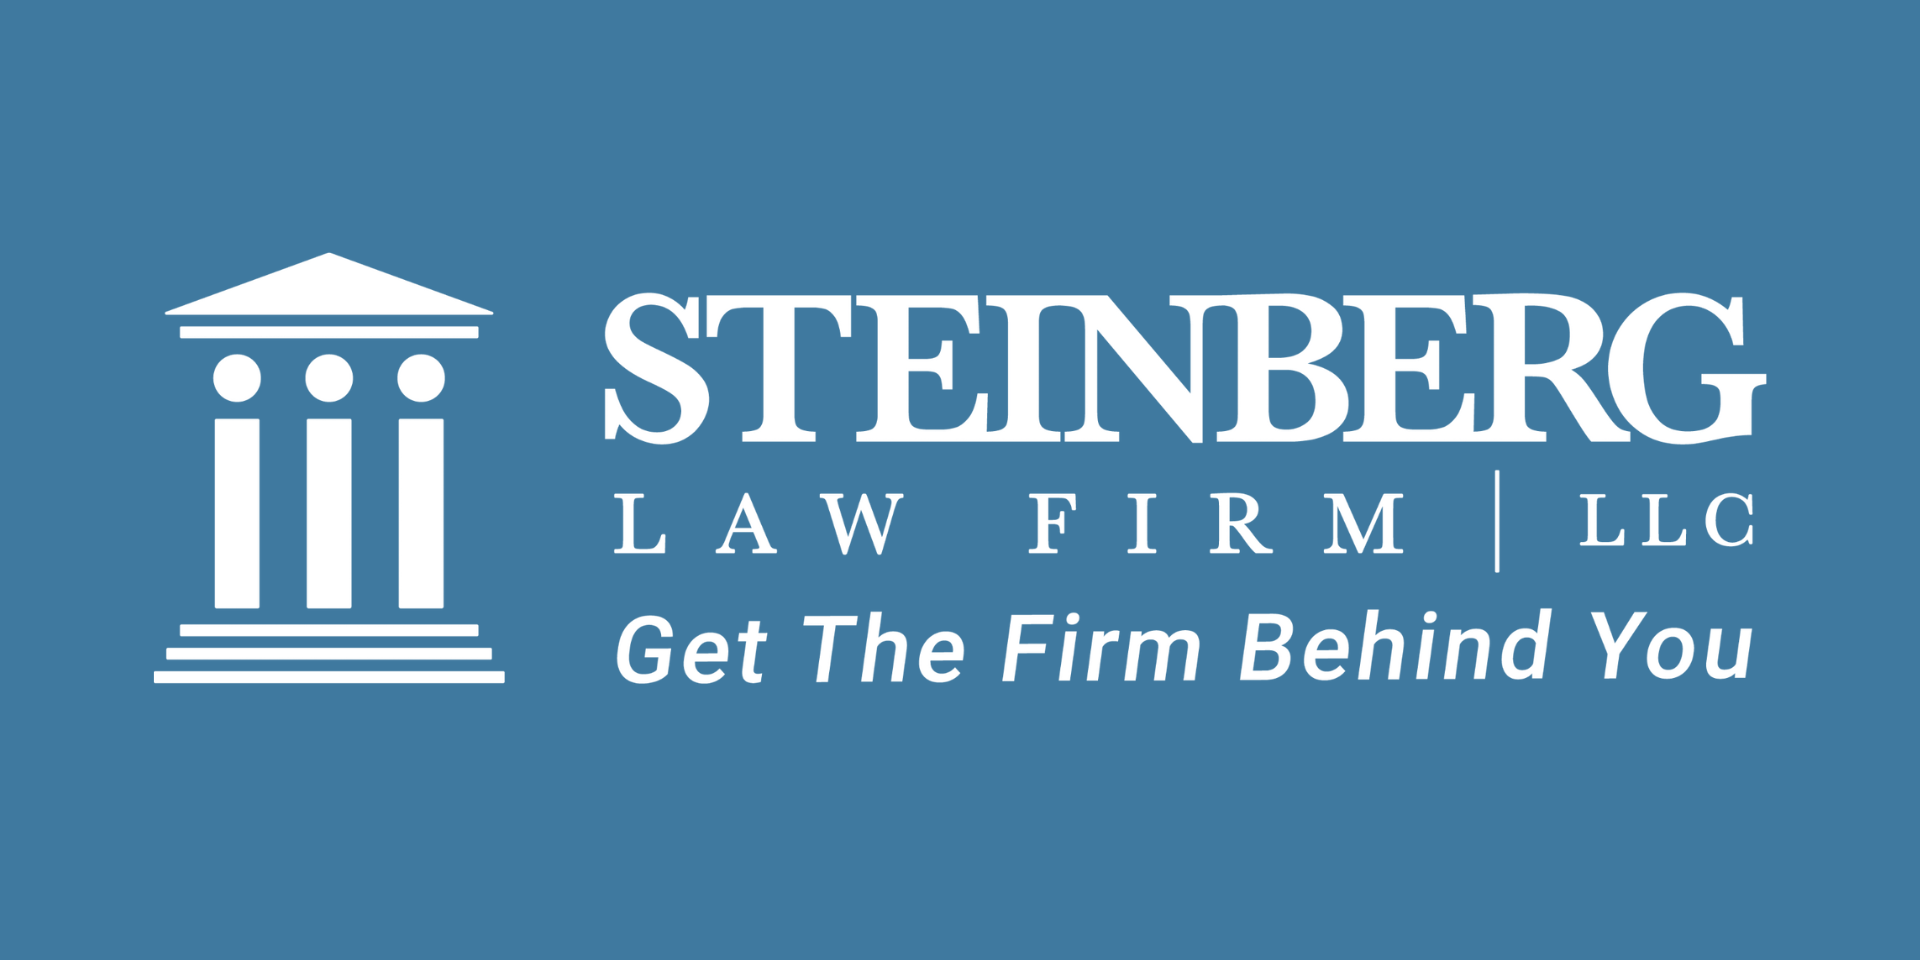 Steinberg Law Firm Named Best Law Firm